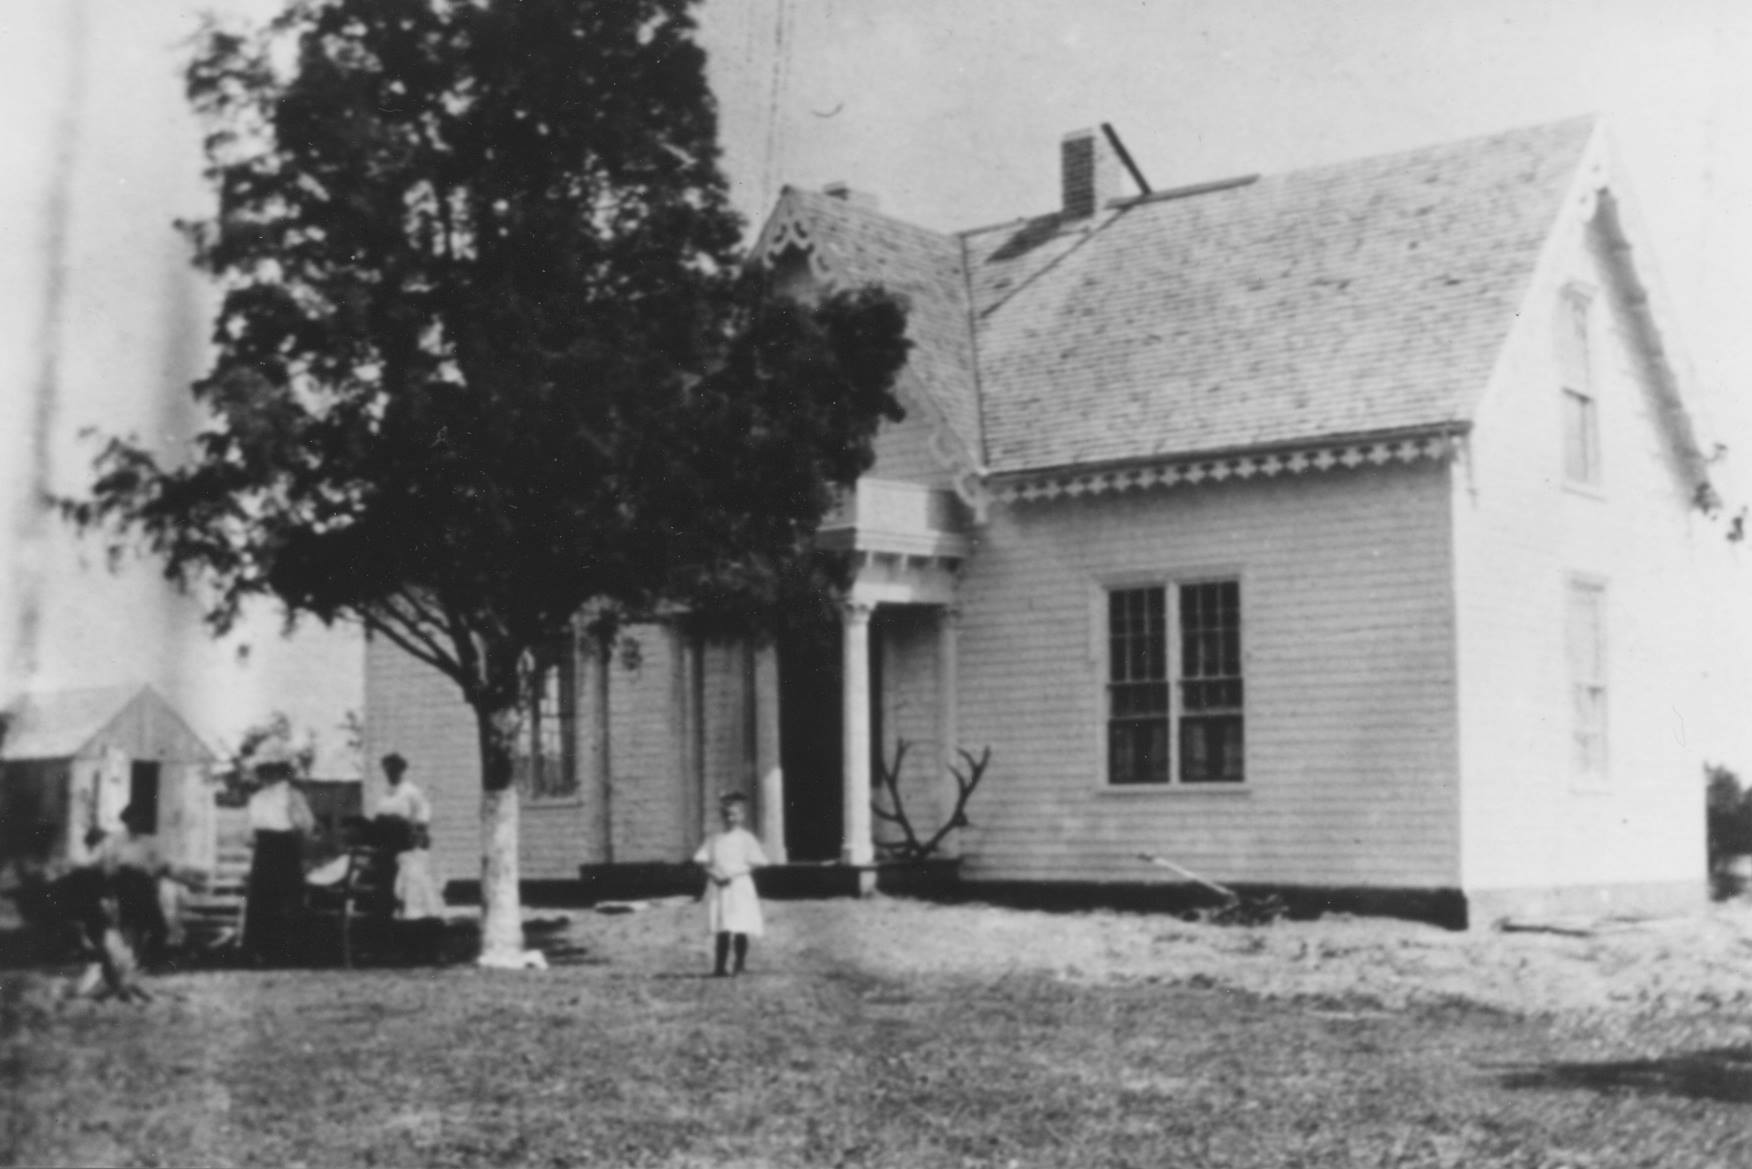 Early photo of the property, when it was owned by the Lowe family